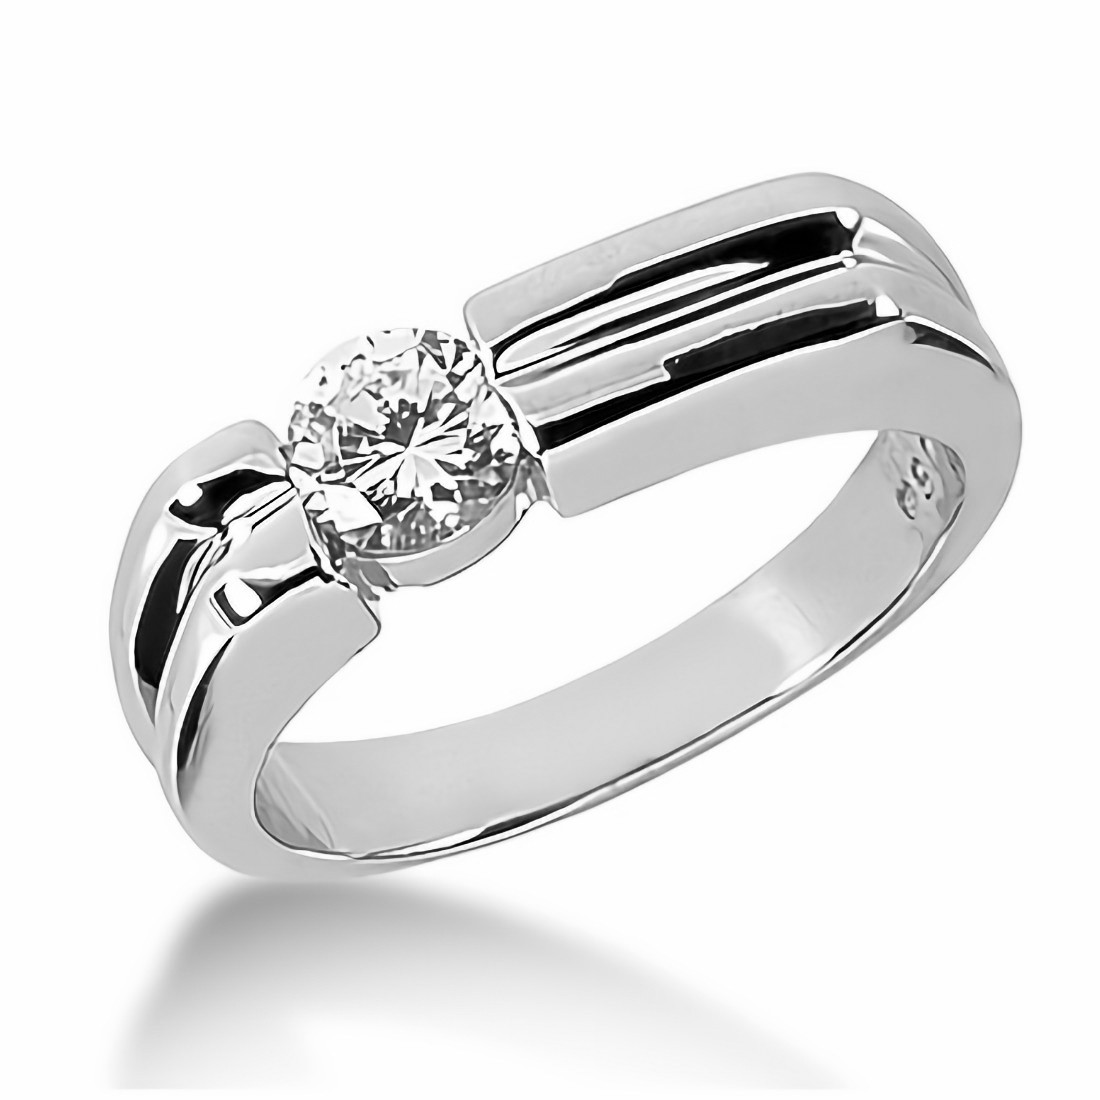 8mm Stainless Steel Wood Wedding Band Engagement Rings for Men Y1539 (Men  Size 8) - Walmart.com